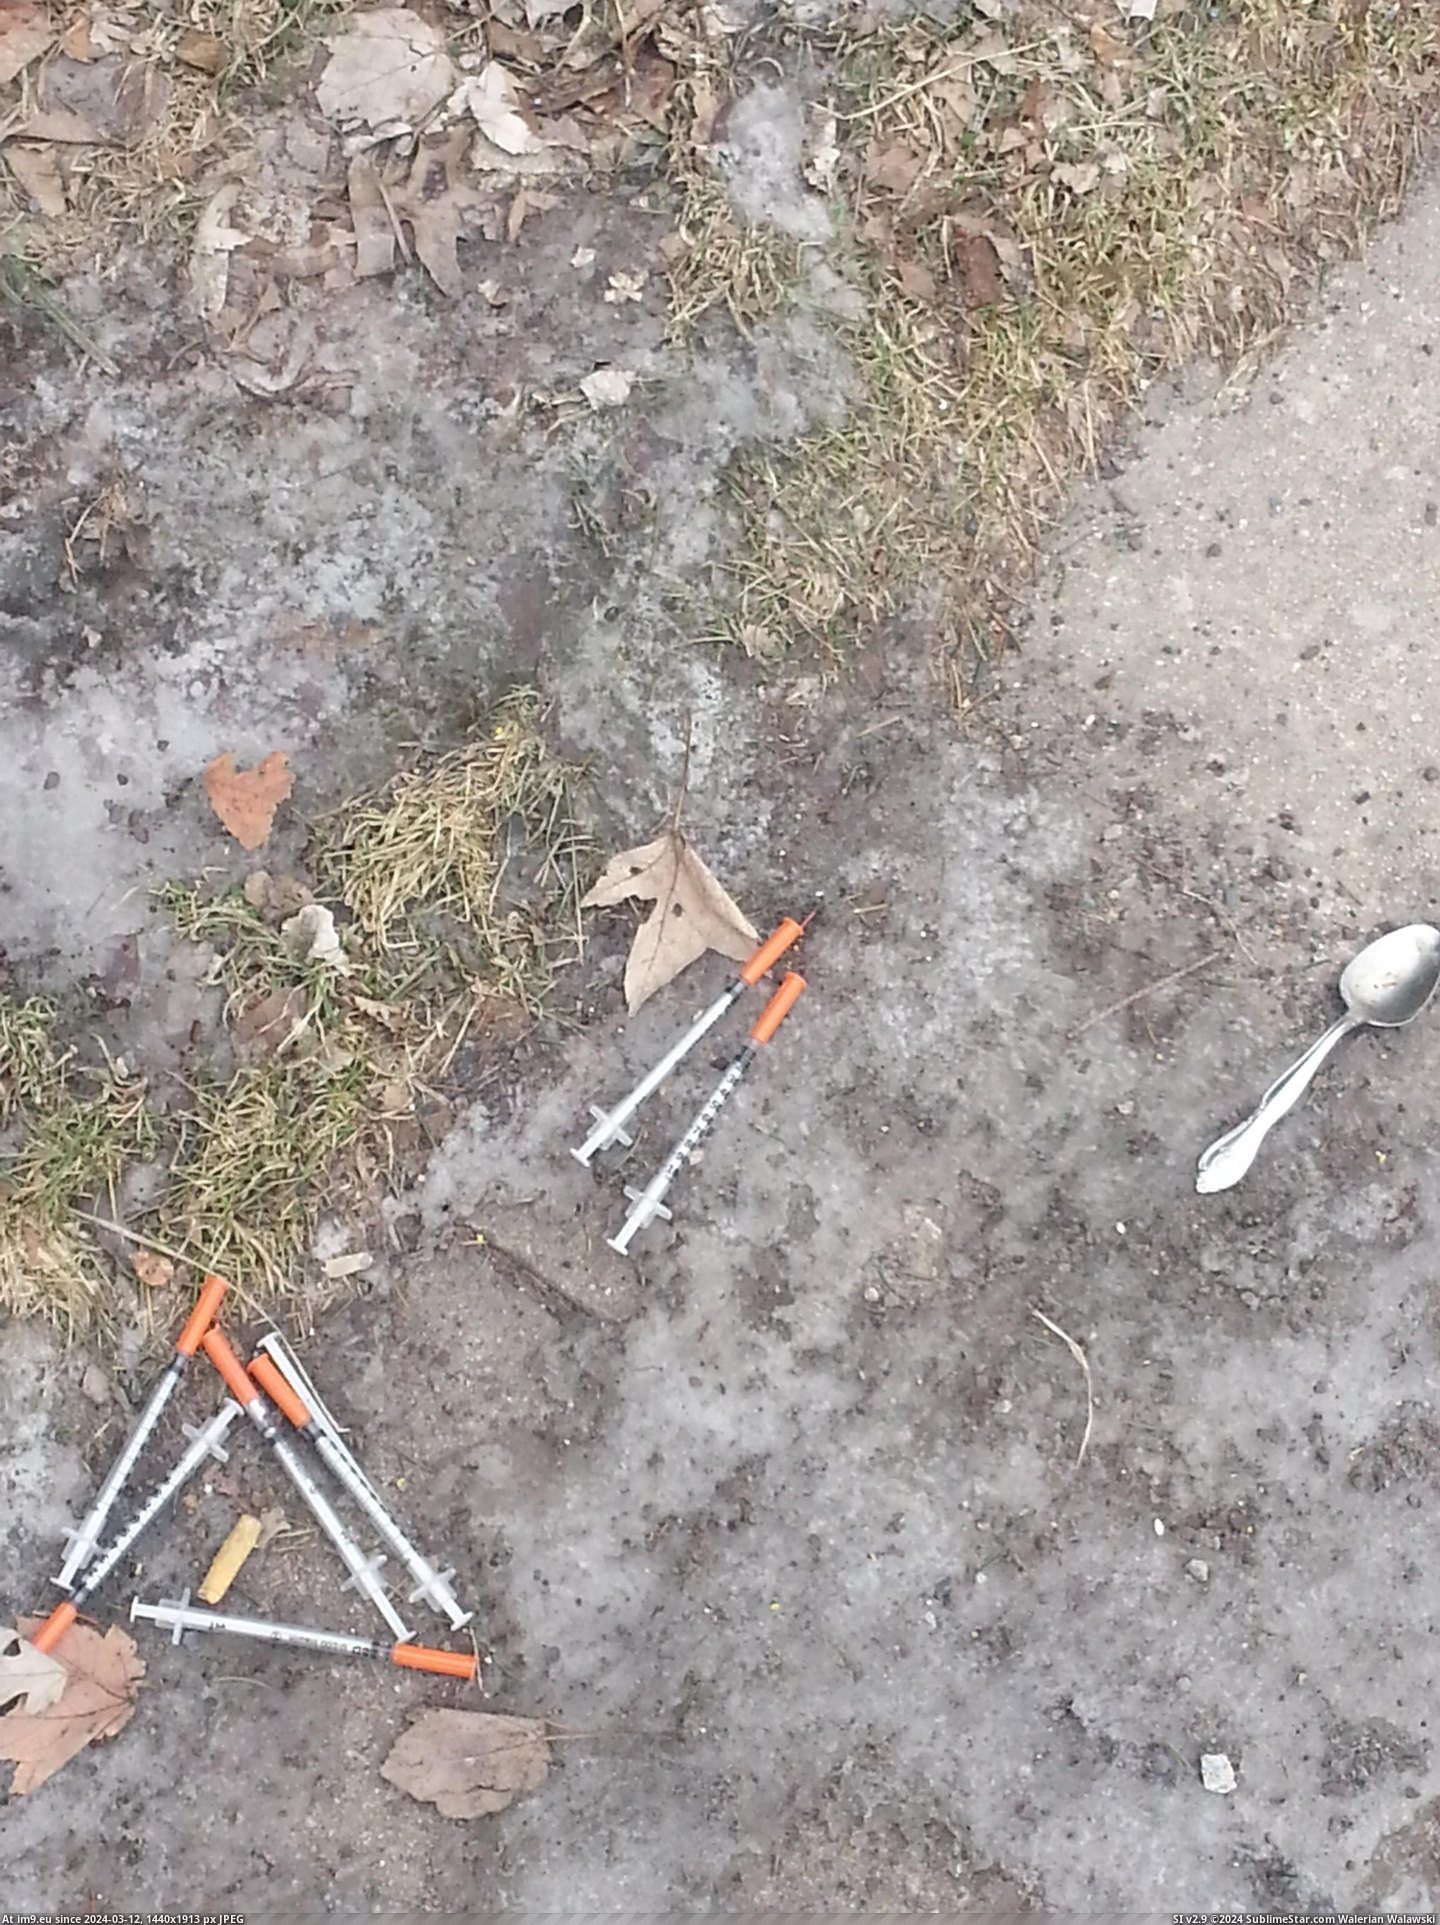 #Wtf #Eating #Cereal #Diabetic #Syringes #Lost #Poor [Wtf] Some poor diabetic seems to have lost his syringes while eating cereal Pic. (Bild von album My r/WTF favs))